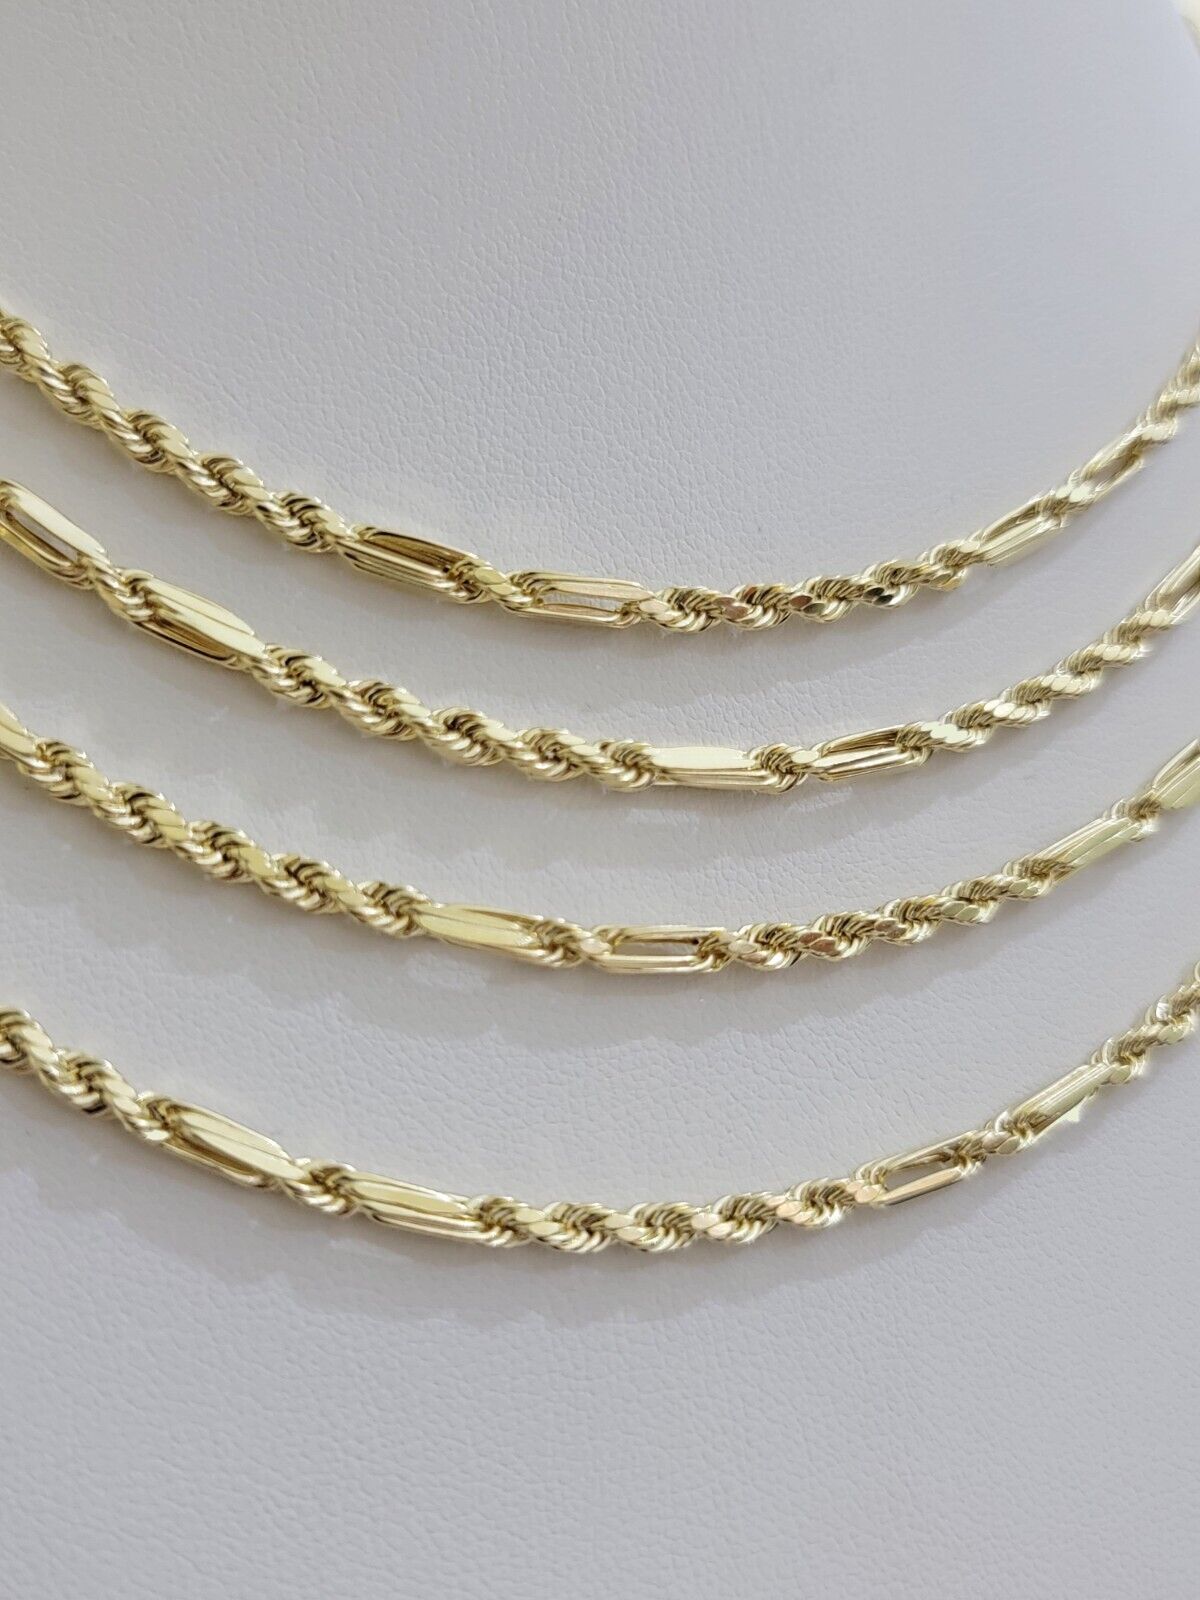 Real 10k Yellow Gold Milano Rope Chain Necklace 18